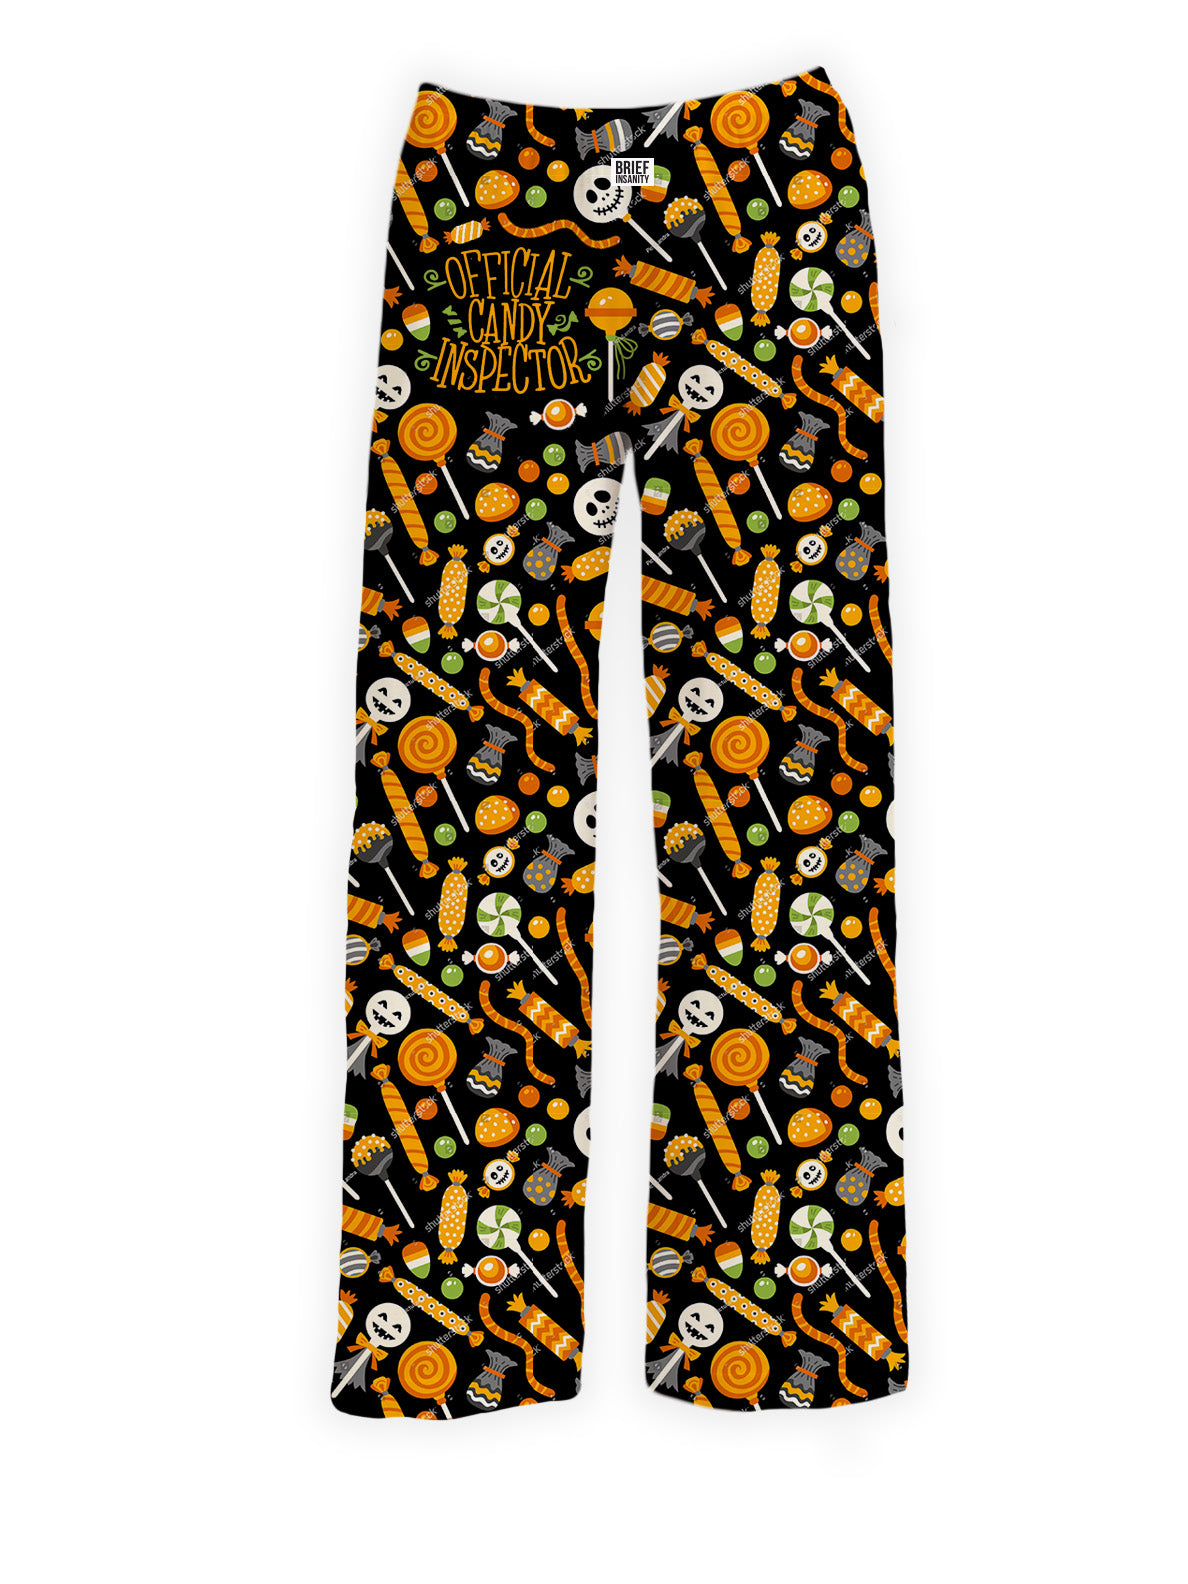 Official Candy Inspector Pajama Pants